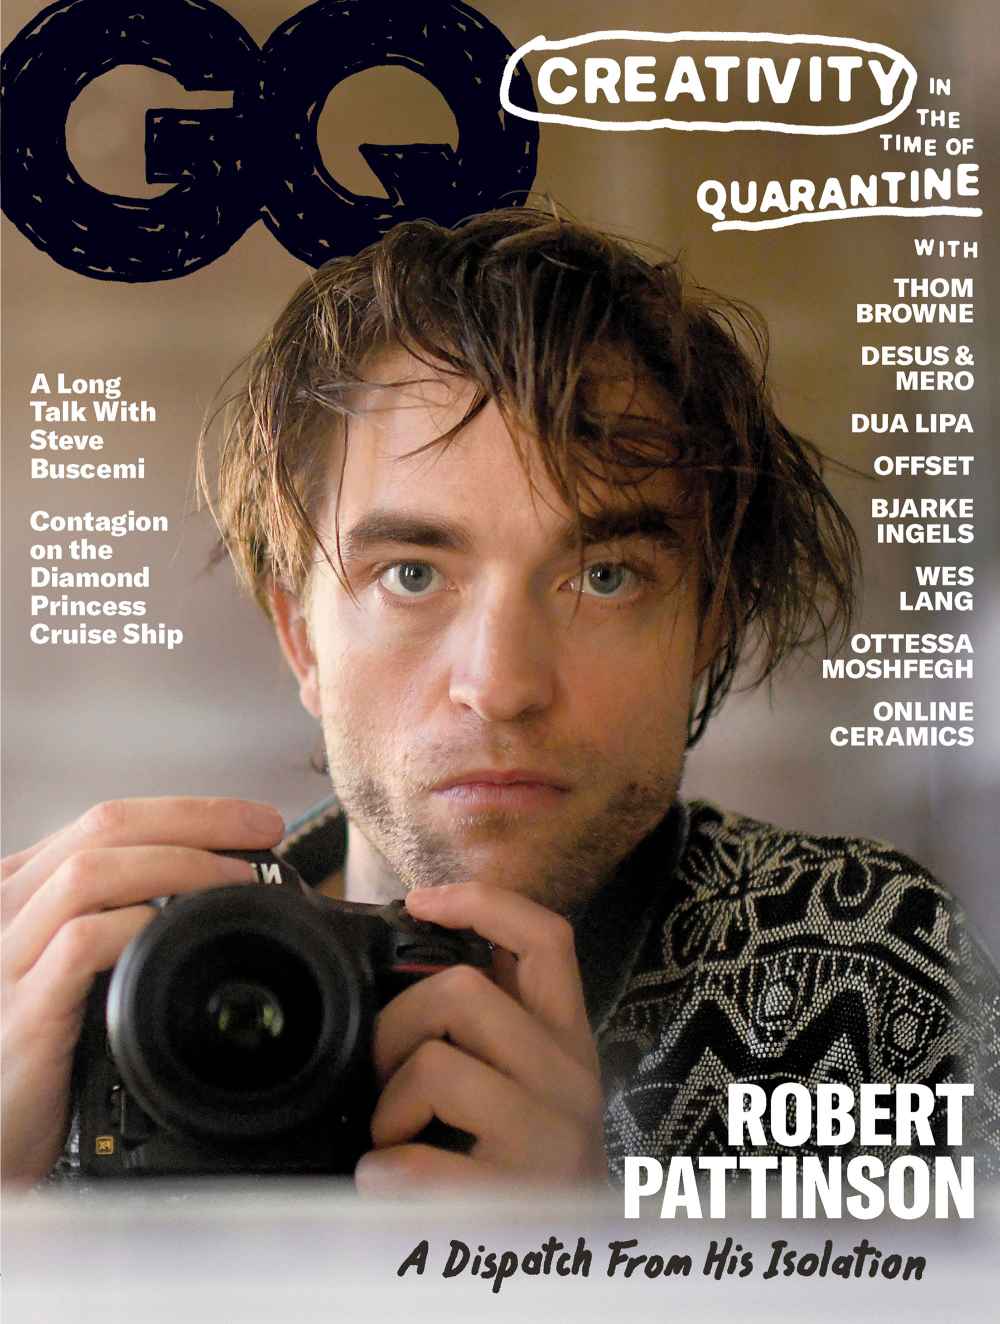 Rob Pattinson Photographs Himself with Quarantine Hair for the Cover of GQ's June Issue